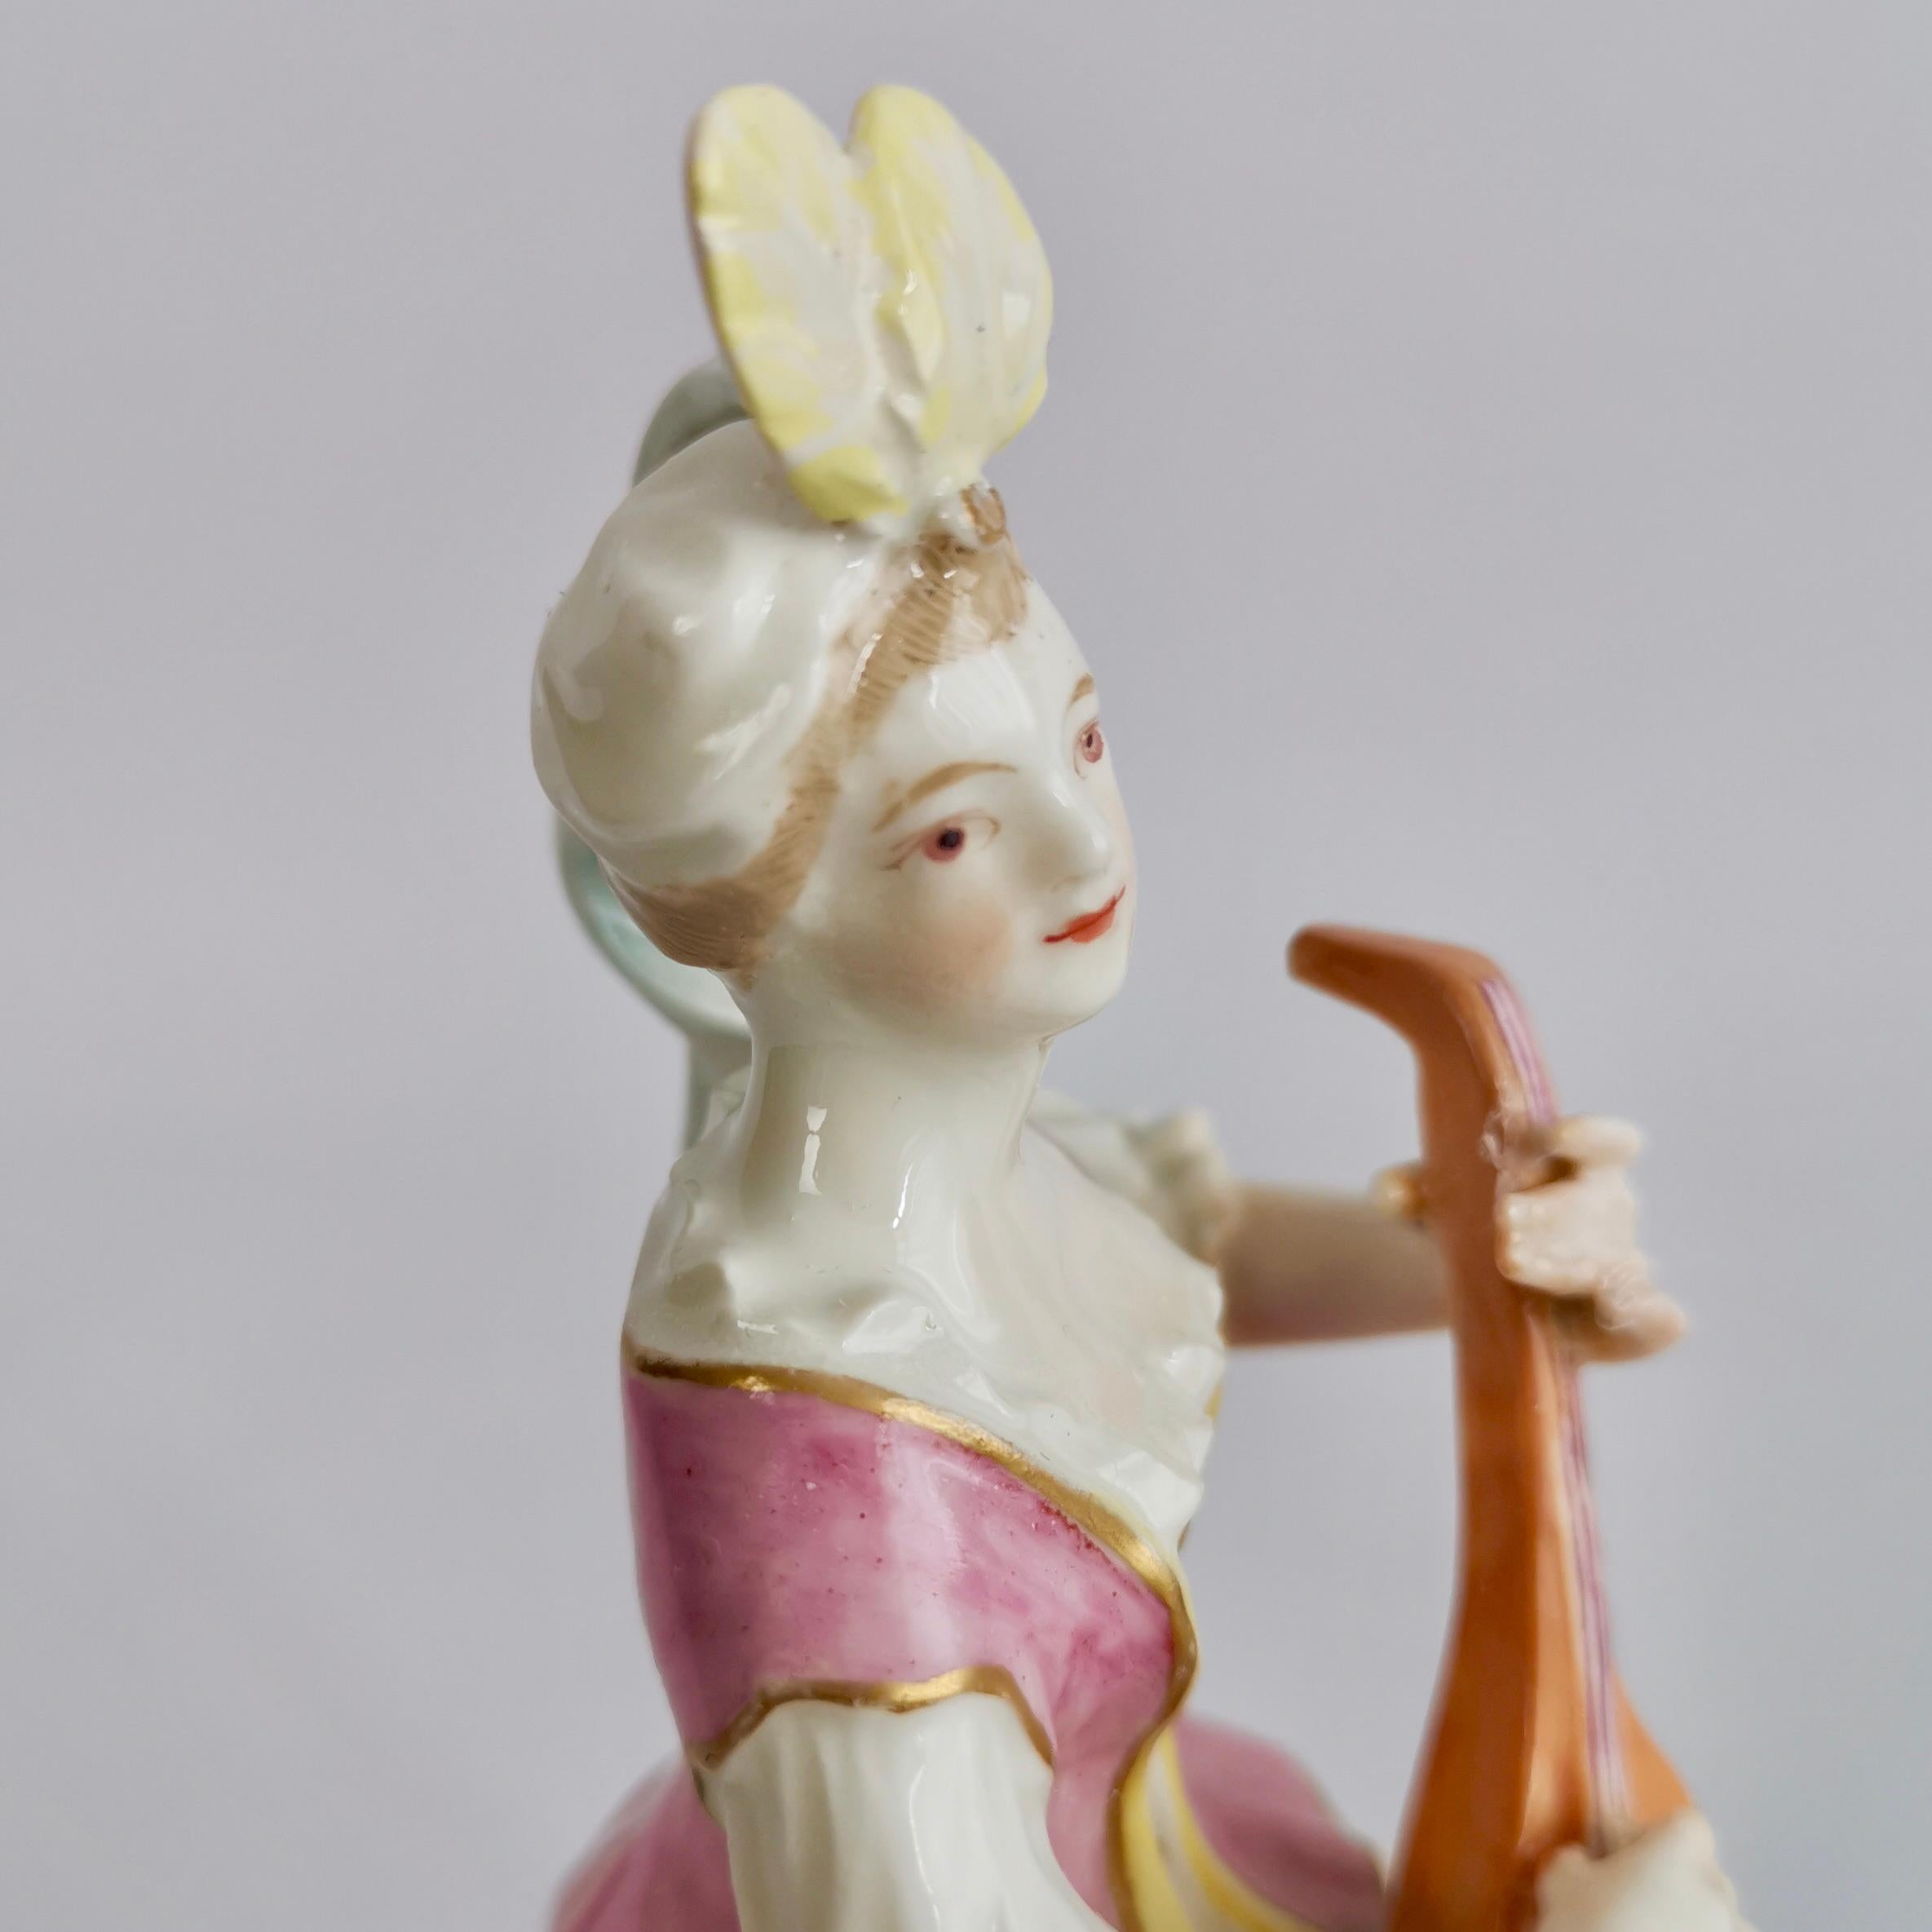 Late 18th Century Chelsea-Derby Porcelain Figure of Lady with Lute, 18th Century, circa 1770